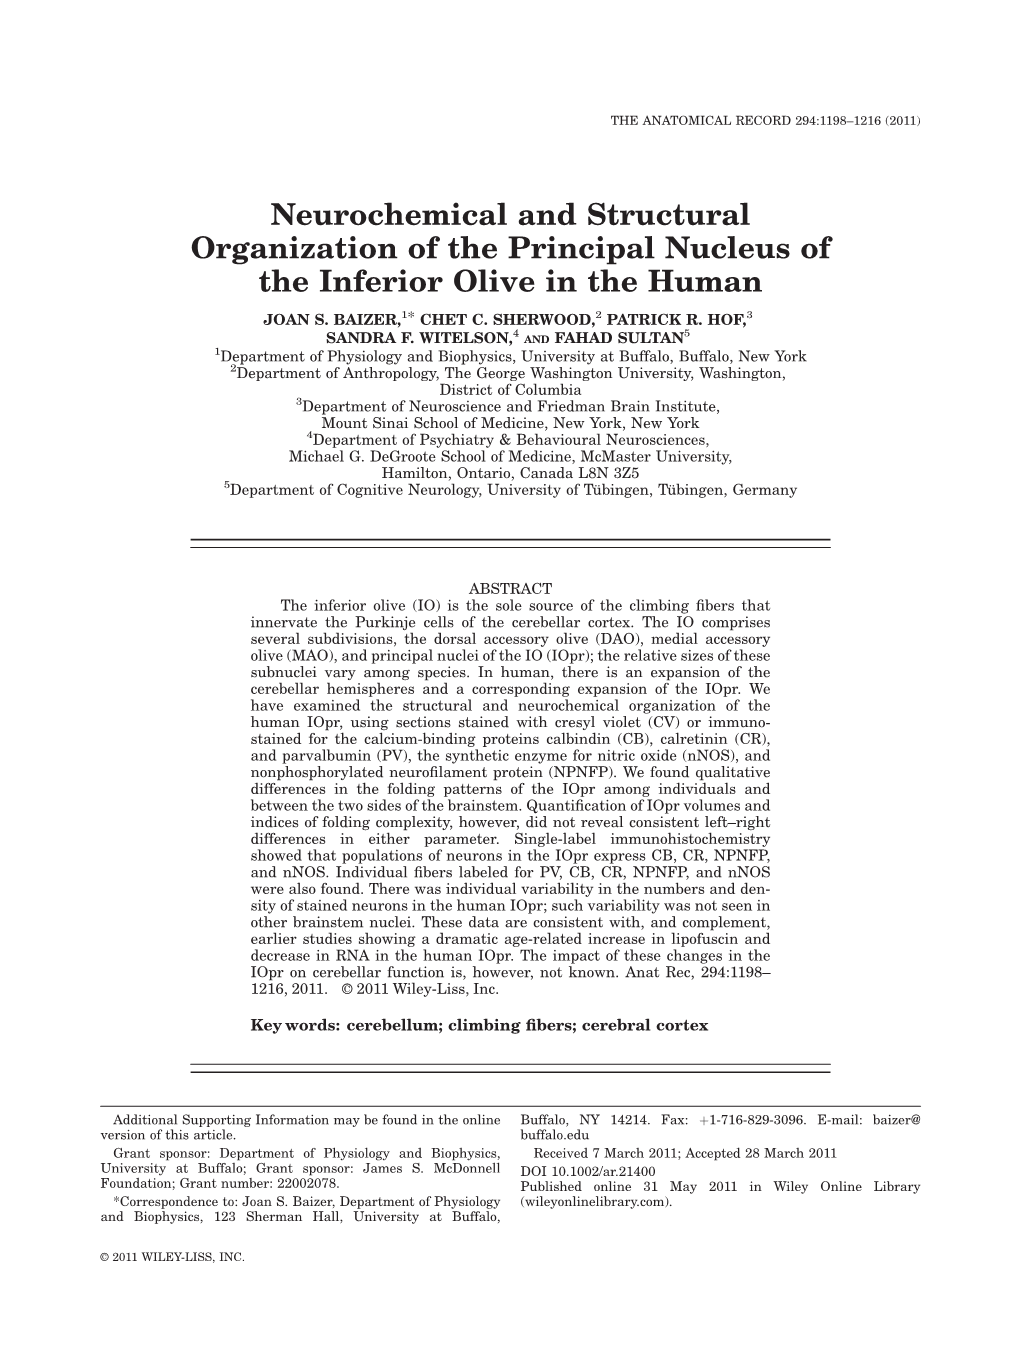 Neurochemical and Structural Organization of the Principal Nucleus of the Inferior Olive in the Human